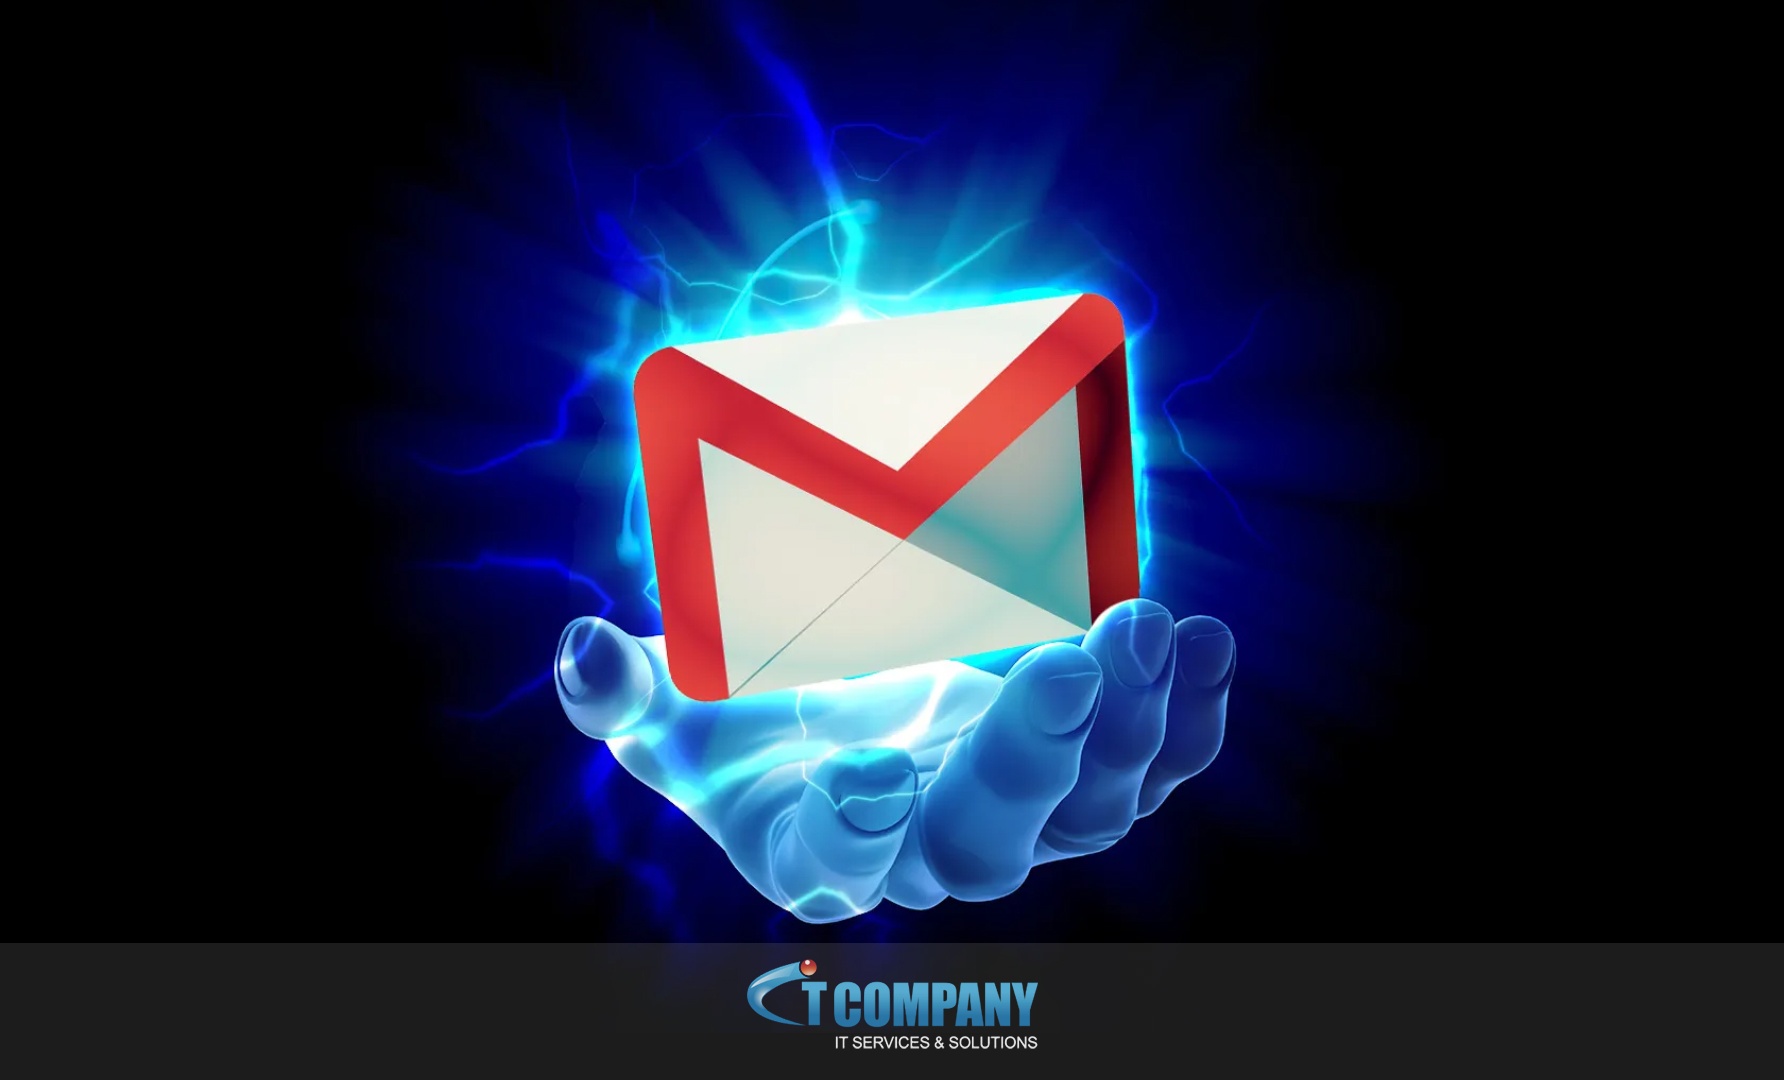 Gmail arrived with a significant feature and a makeover